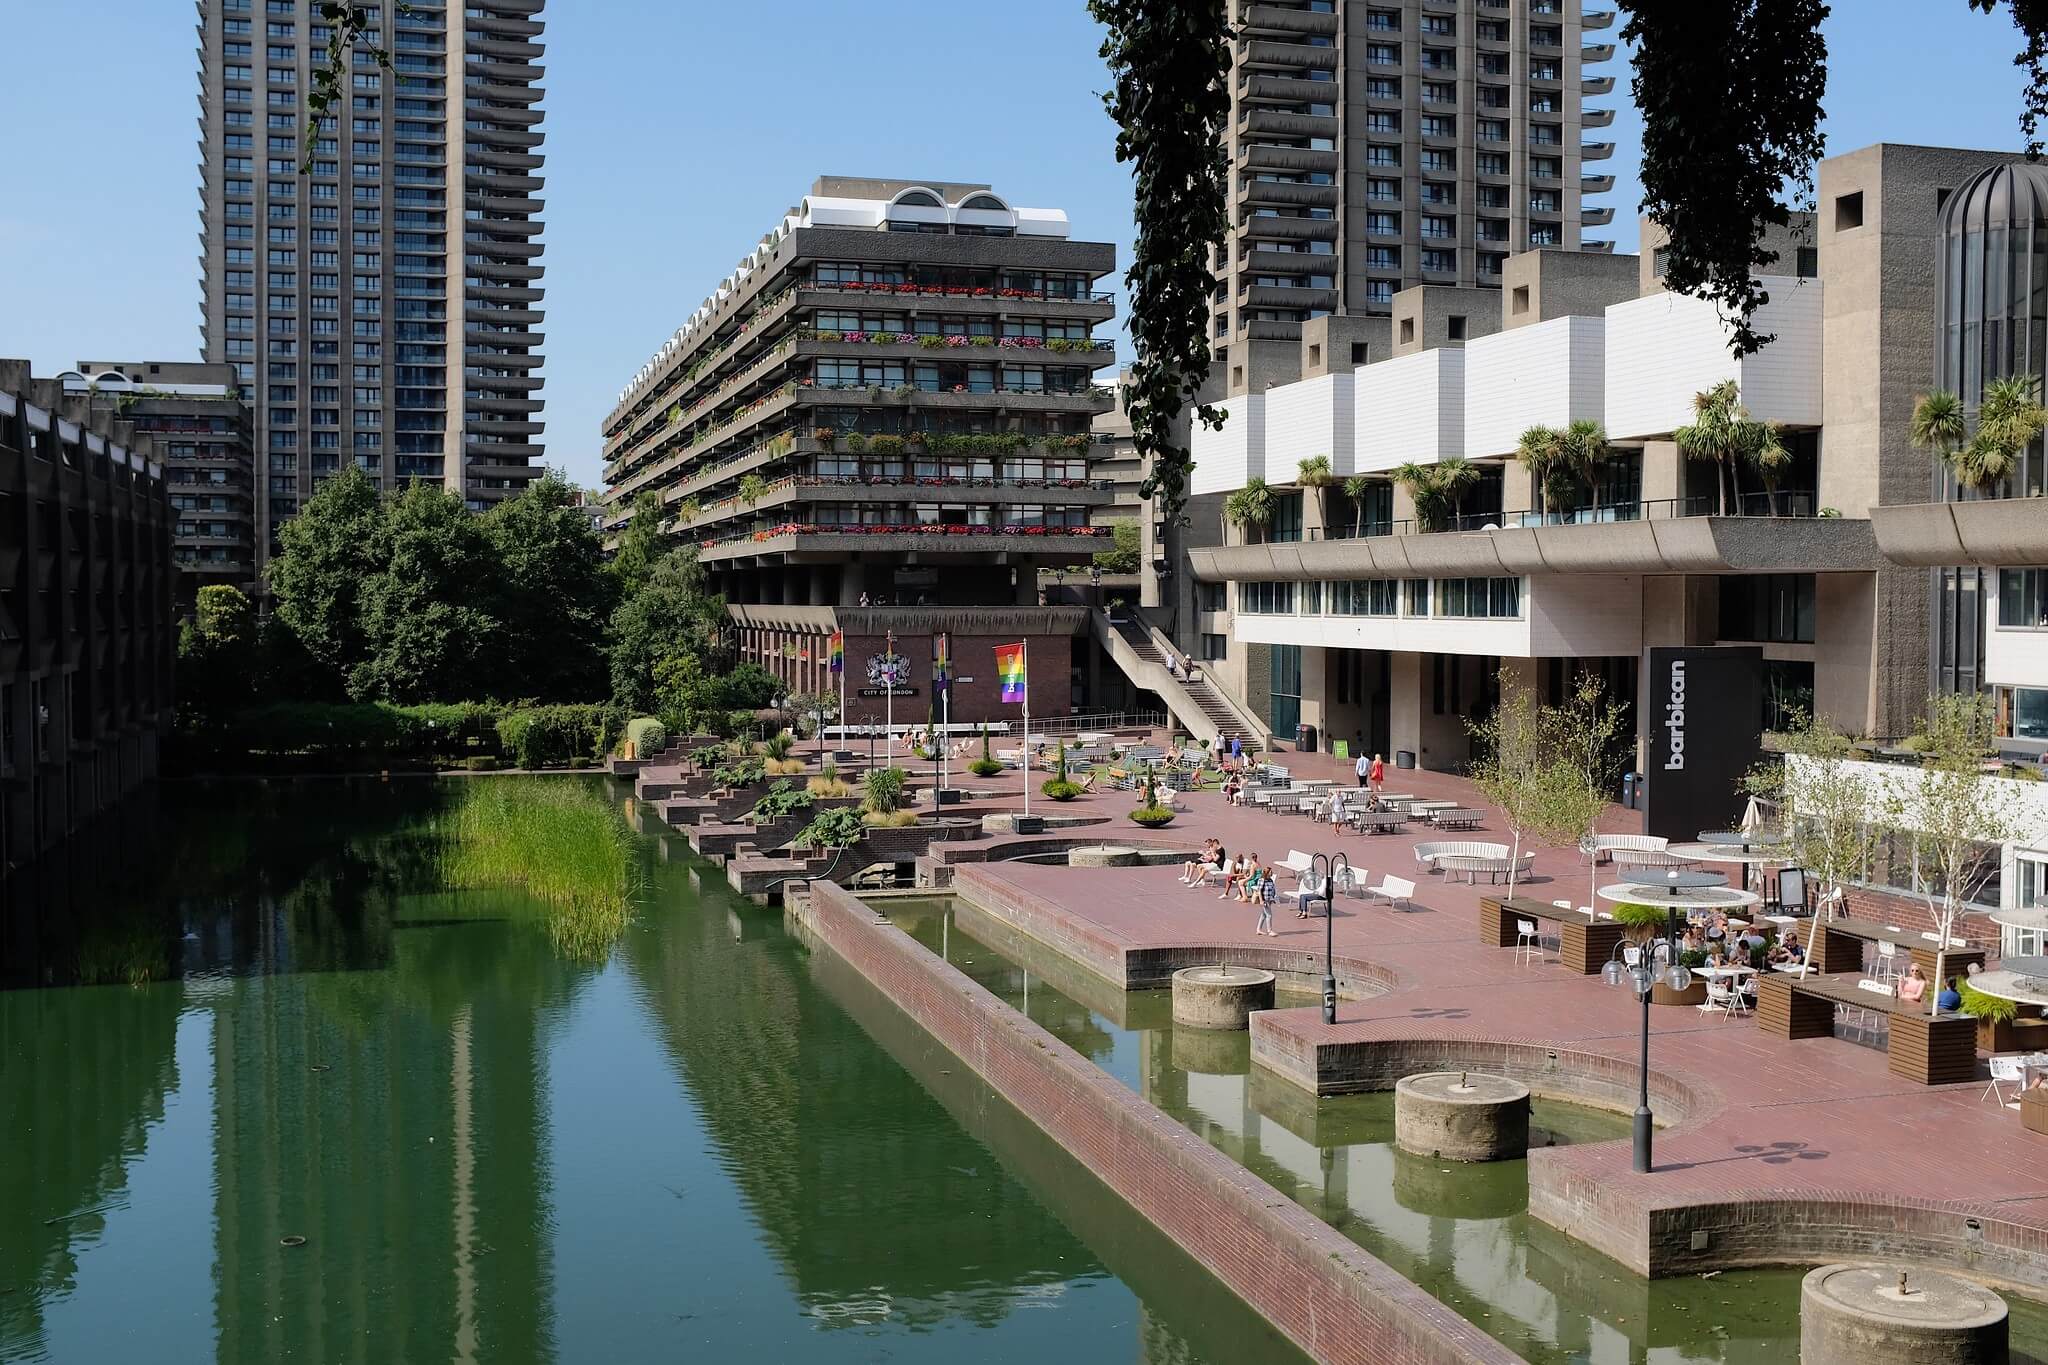 Review: 'All Of This Belongs To You' - Civic Urbanism At London's